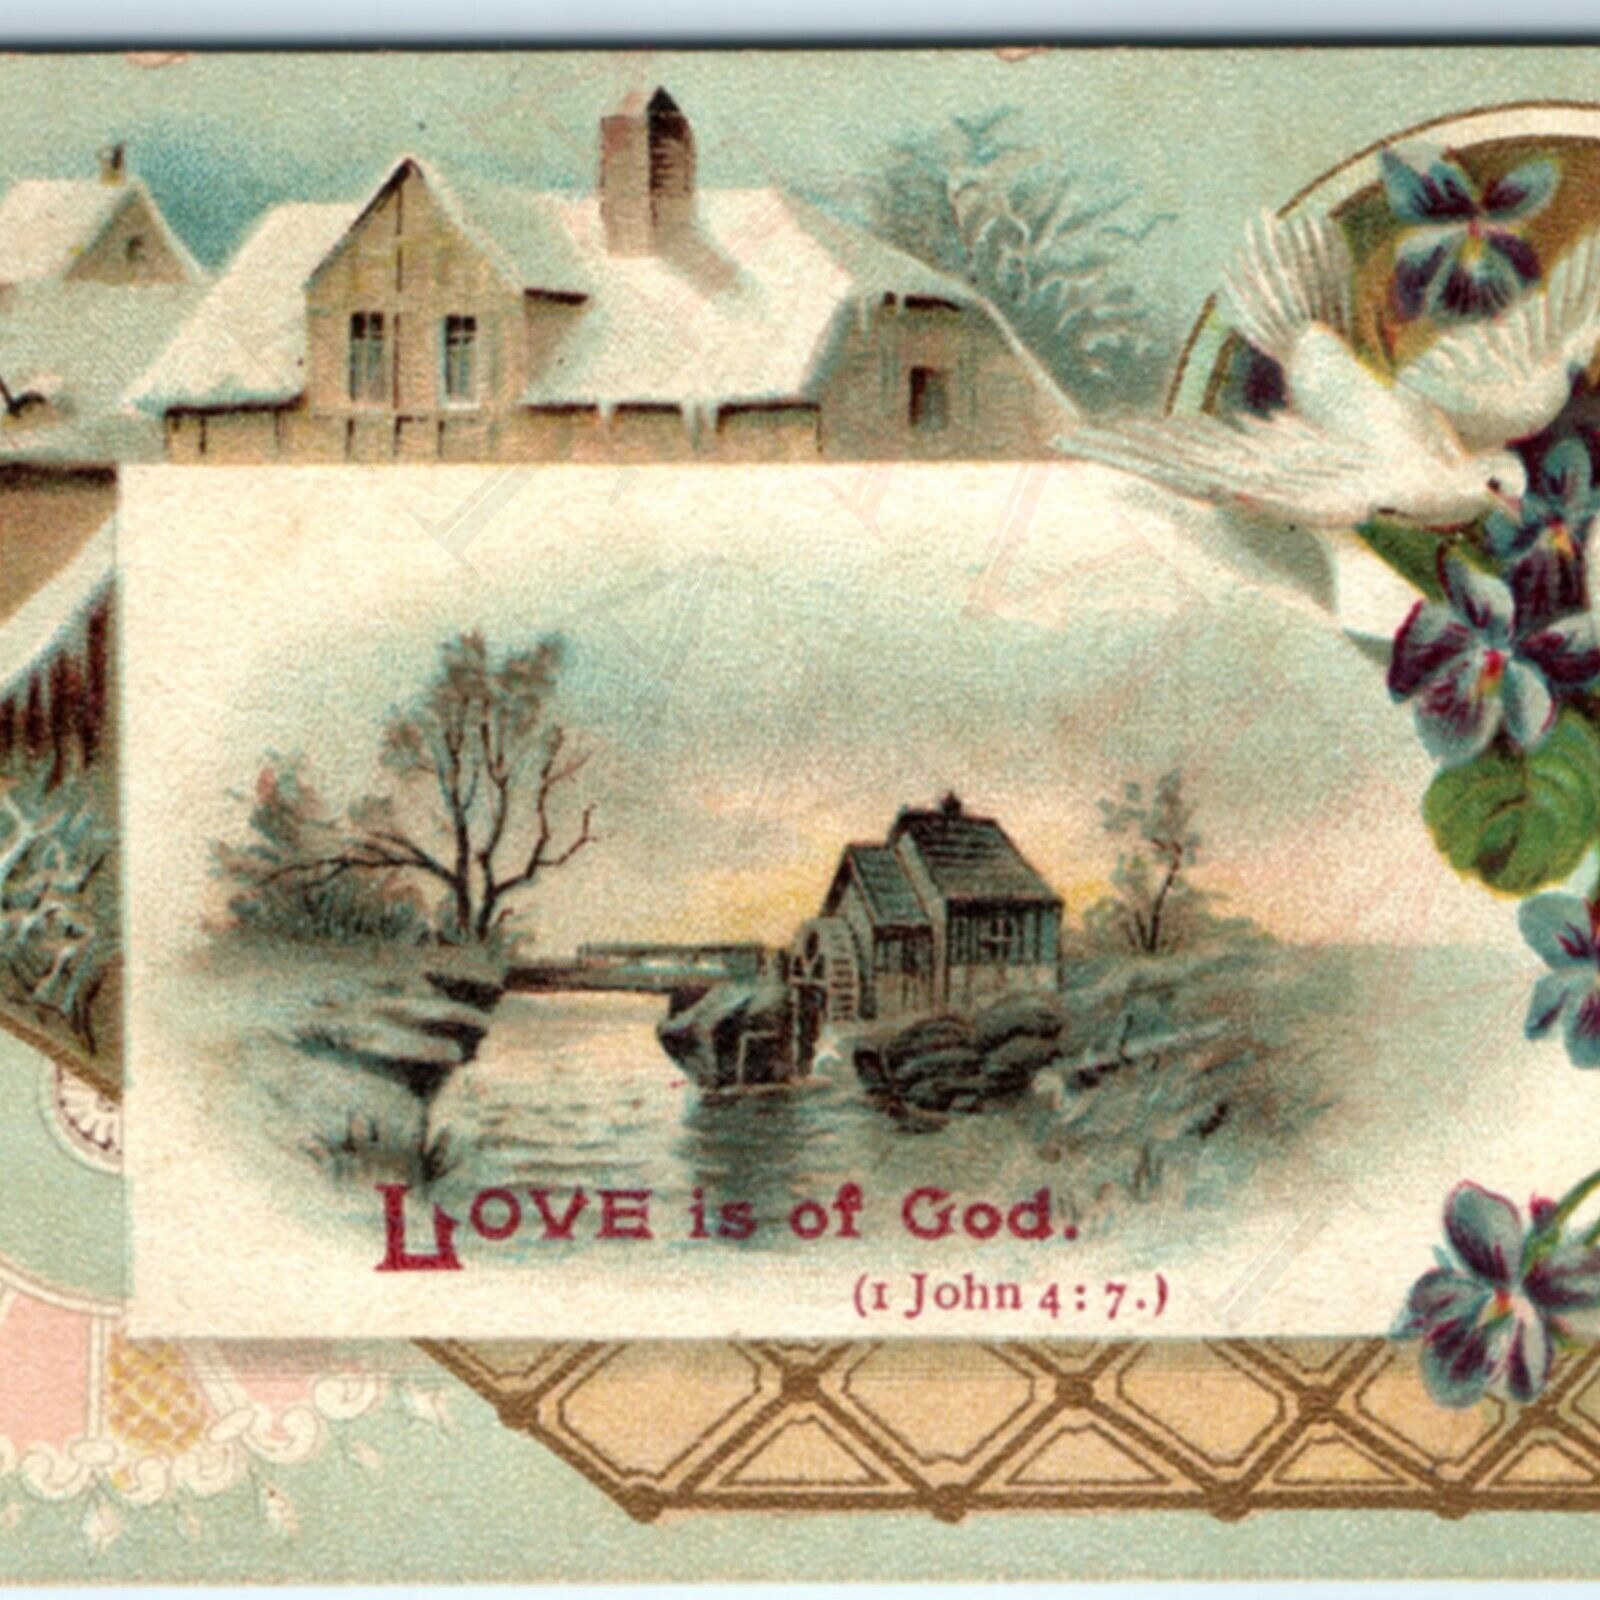 c1890s John 4:7 Love is God Bible Quote Religious NICE Trade Card Christian C45